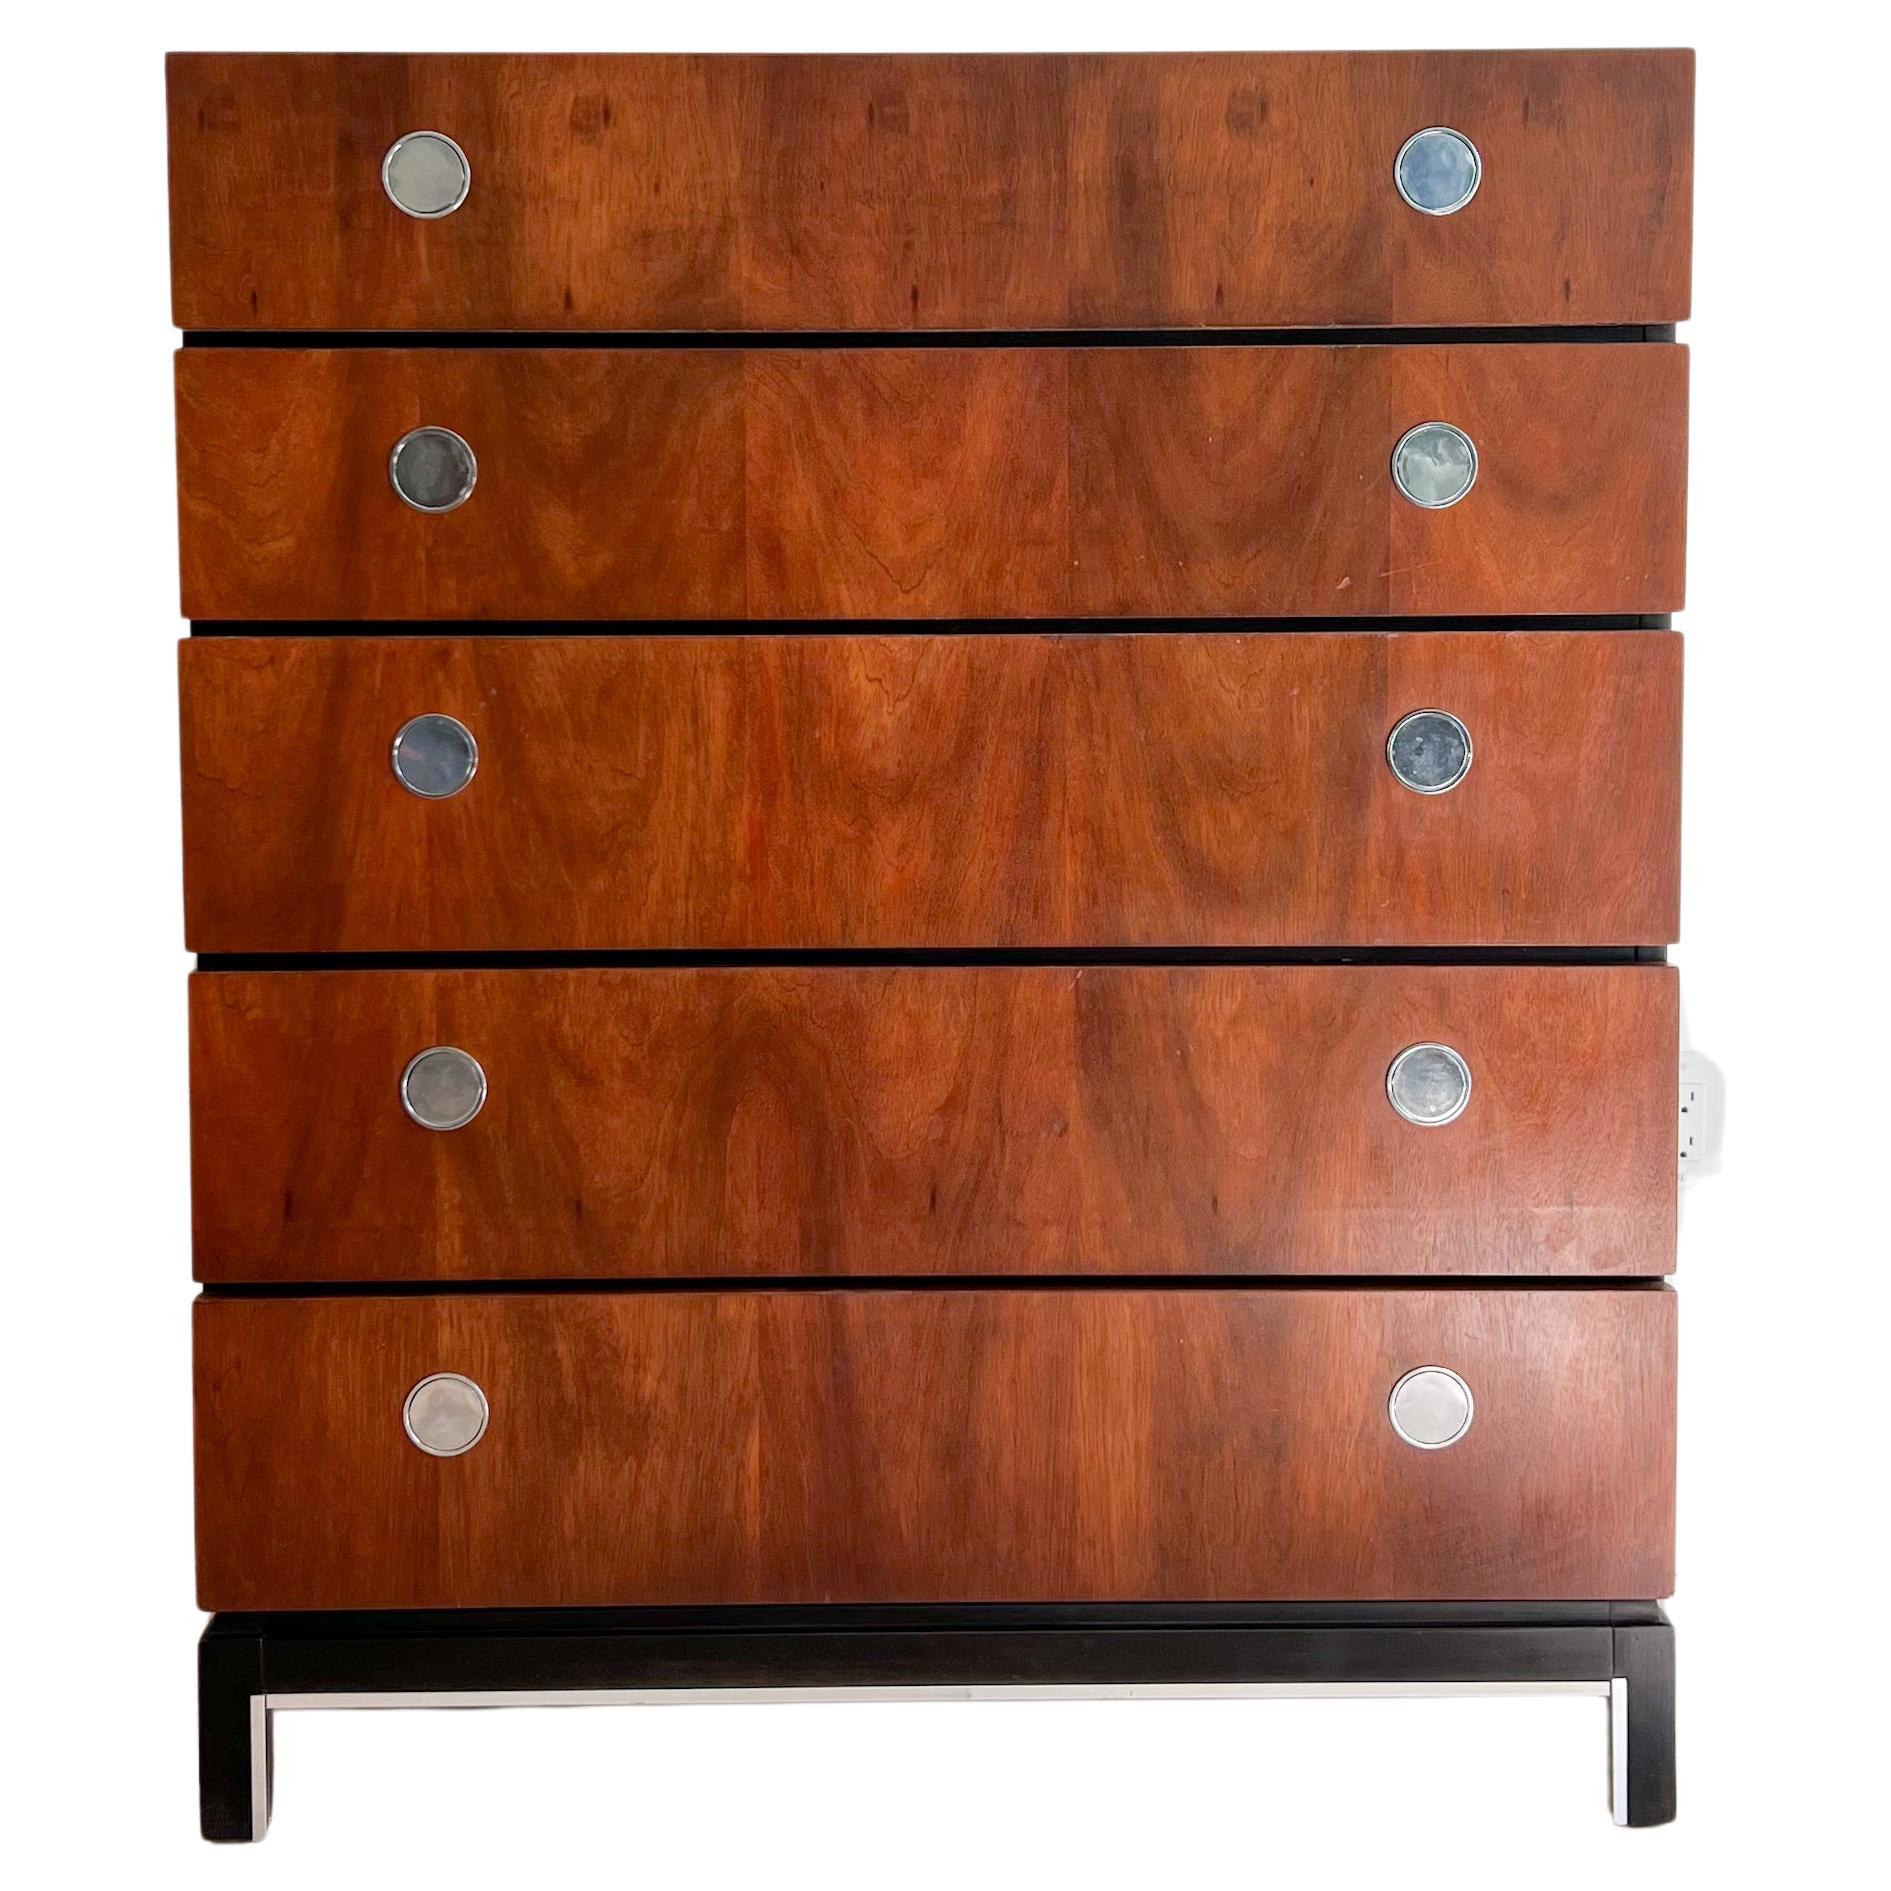 Classic Mid Century Highboy Dresser with Chrome Drawer Pulls For Sale